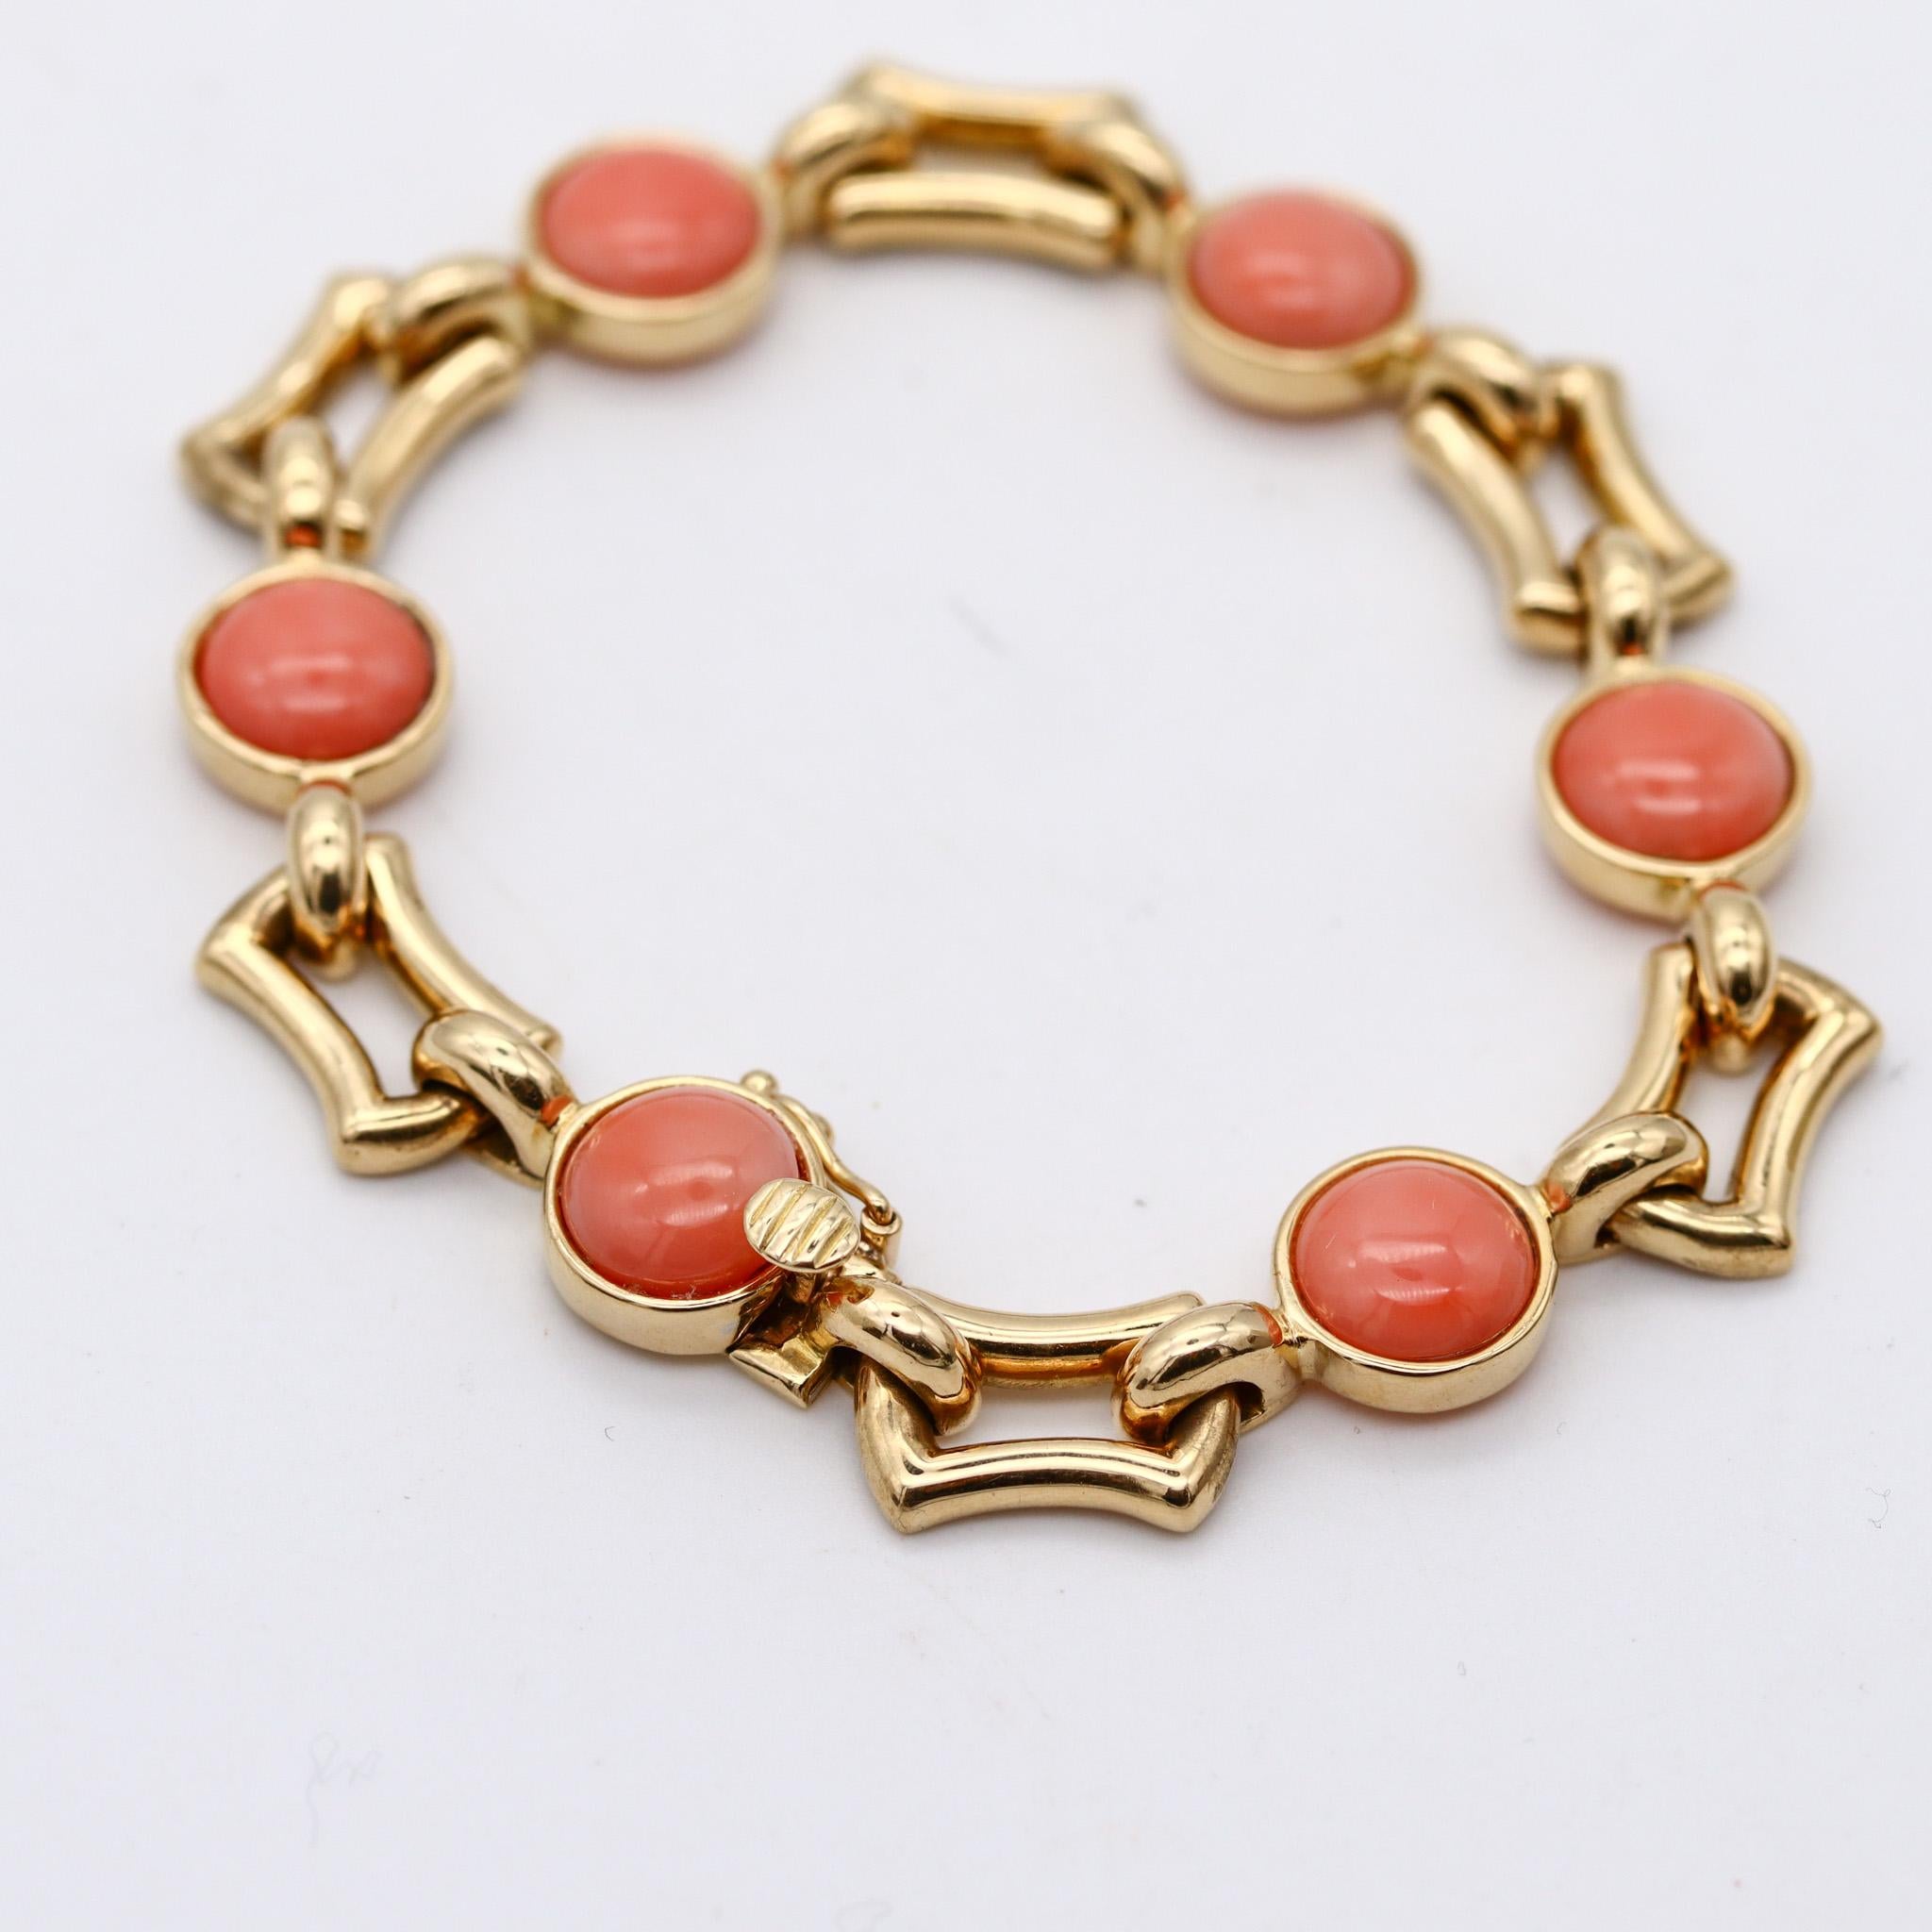 Station corals bracelet designed by Tiffany & Co.

An elegant modernist stations bracelet, created in New York city by Tiffany & Co. This sleek vintage piece of jewelry was carefully crafted in solid yellow and white gold of 18 karats and is fitted